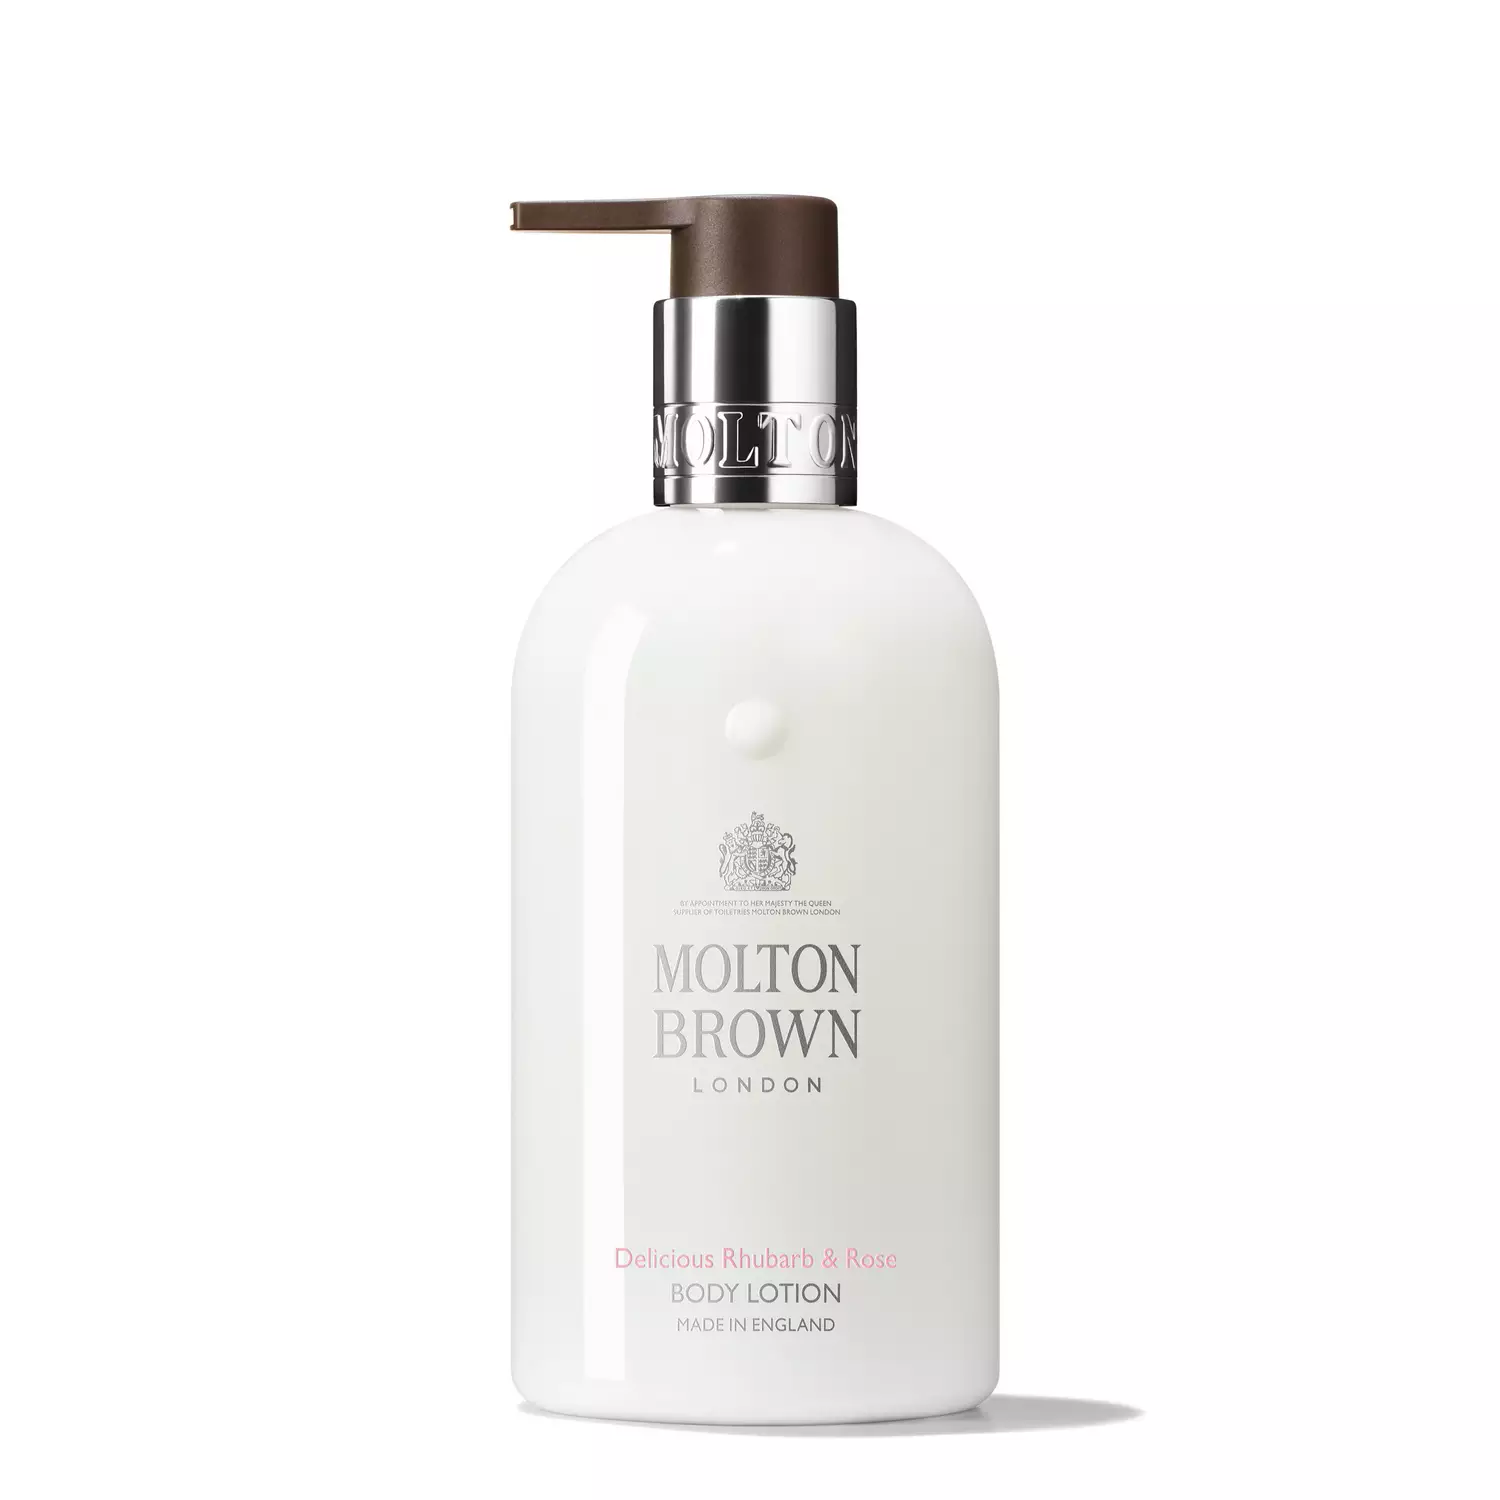 Molton Brown - Delicious Rhubarb & Rose - Body Lotion - 300 ml